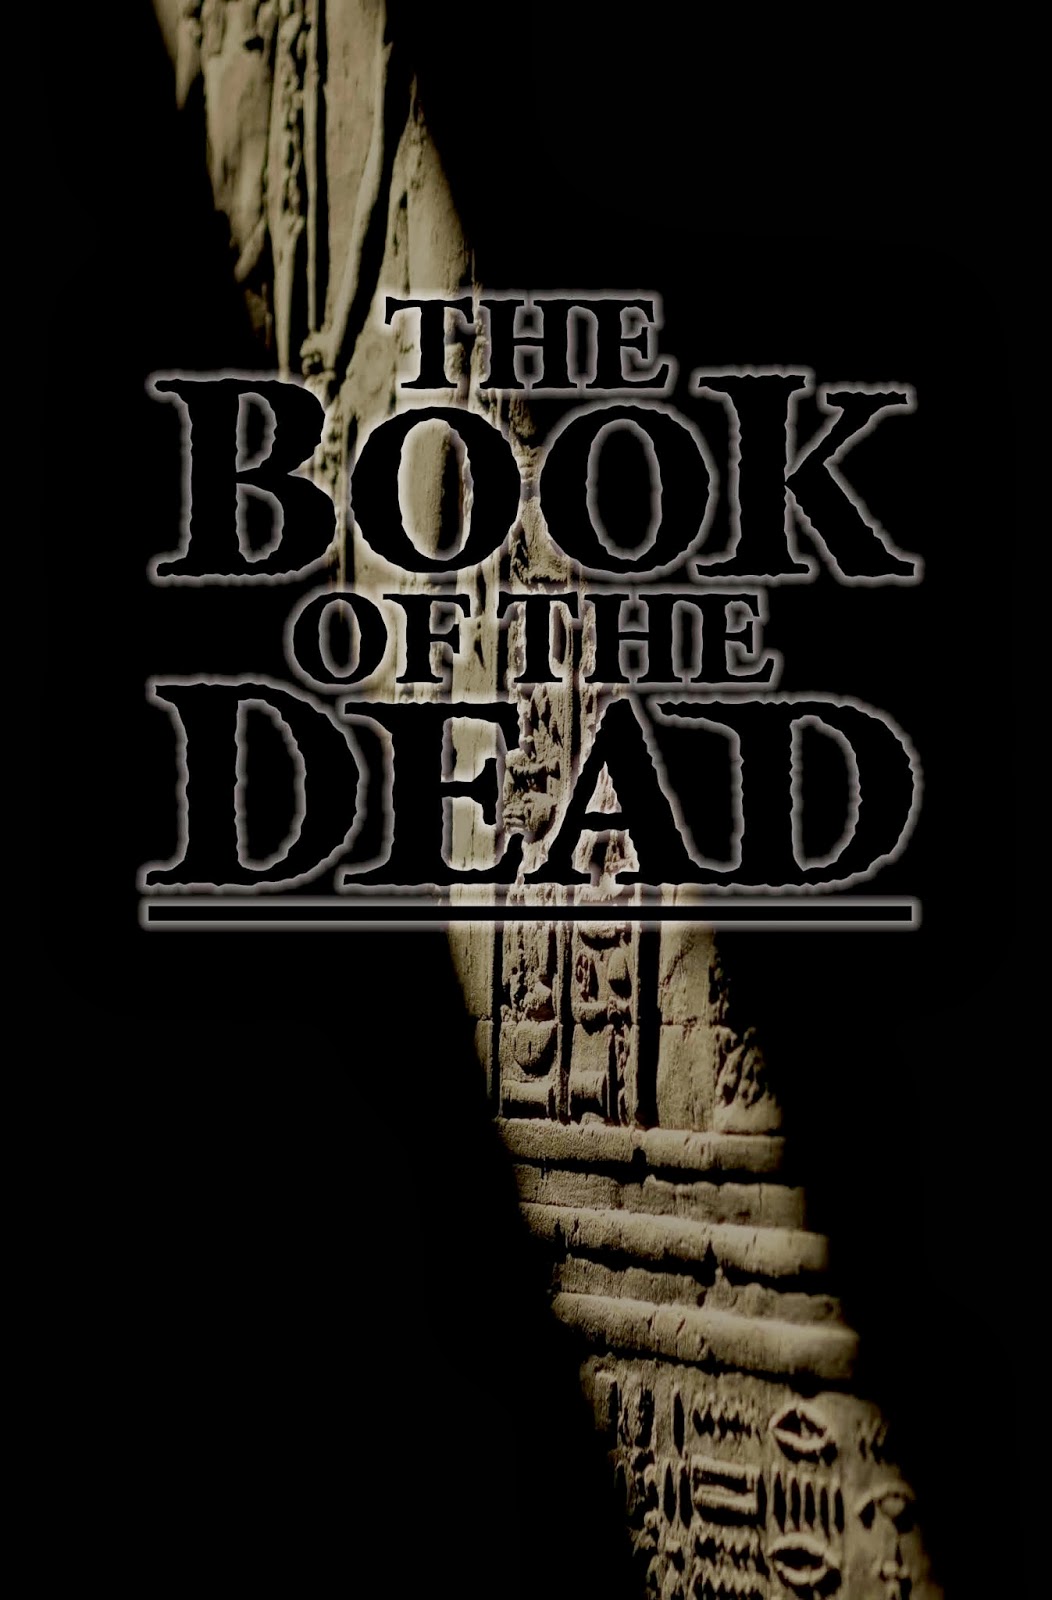 Book Of The Dead